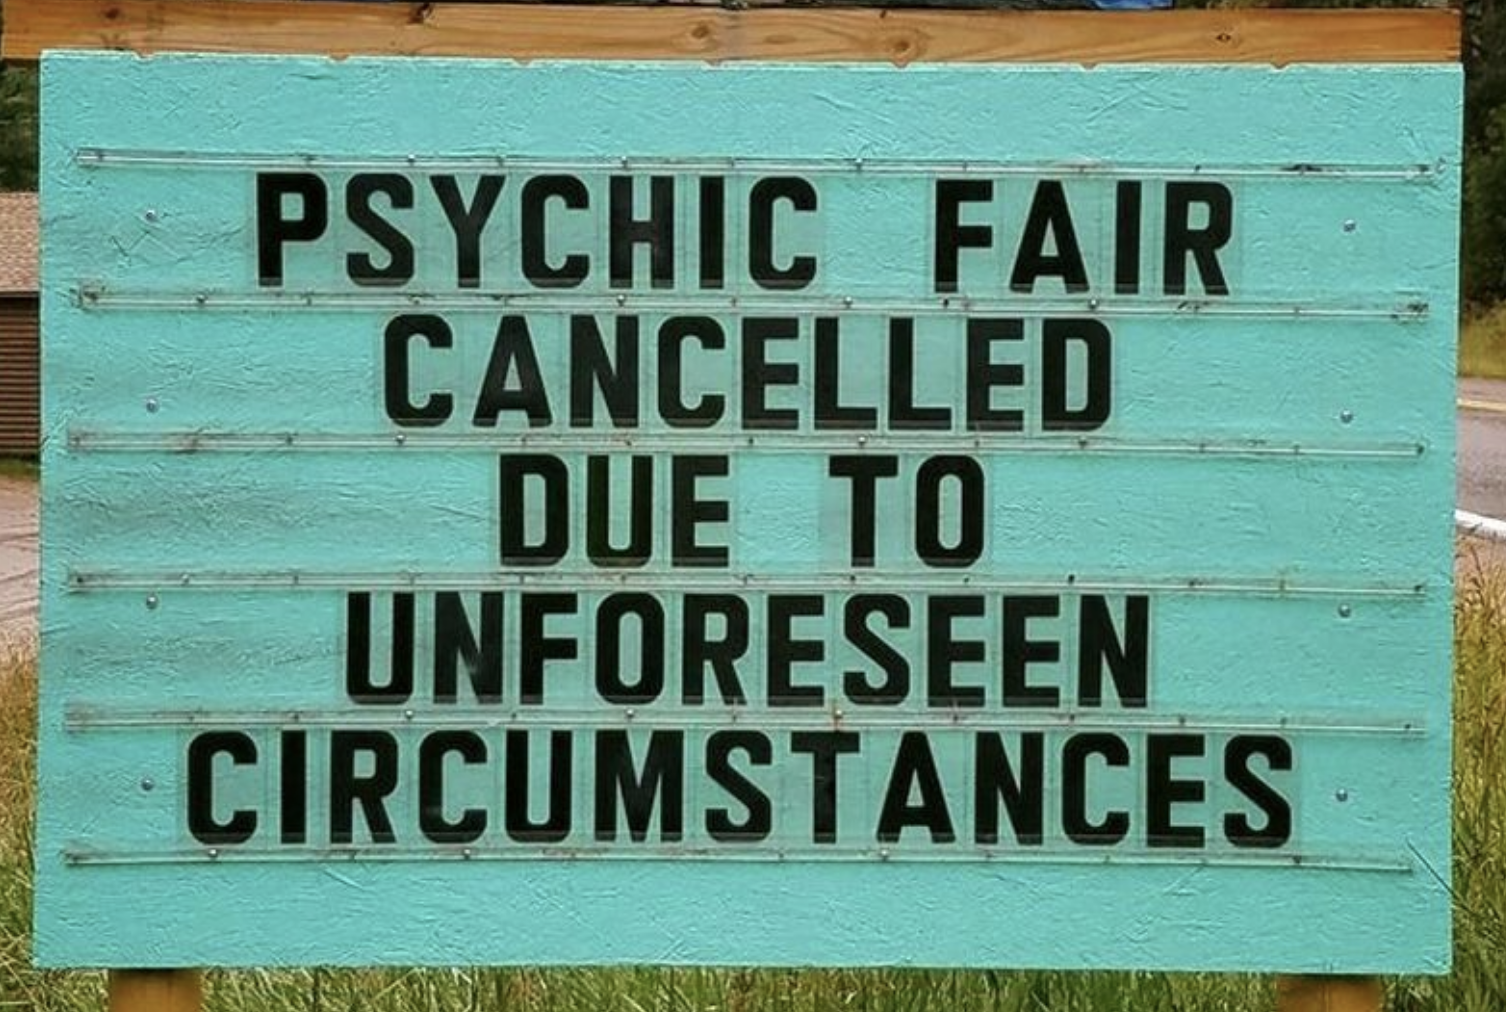 &quot;Psychic fair cancelled due to unforeseen circumstances&quot;